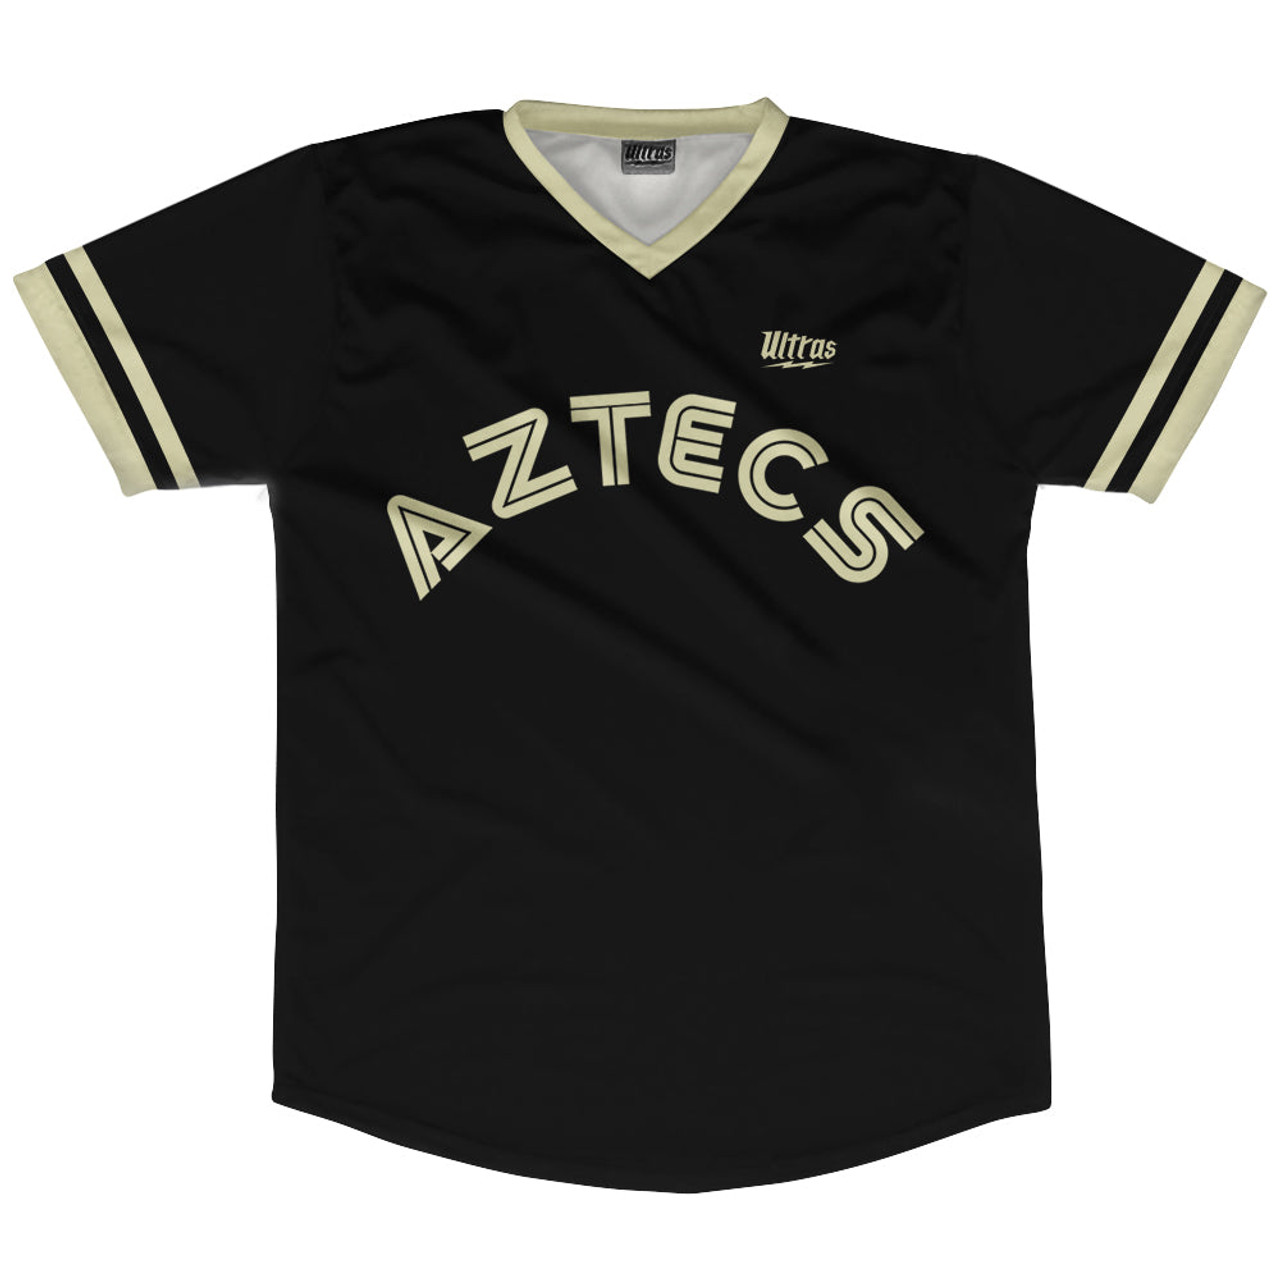 La Aztecs Arched Soccer Jersey Made in USA - Black